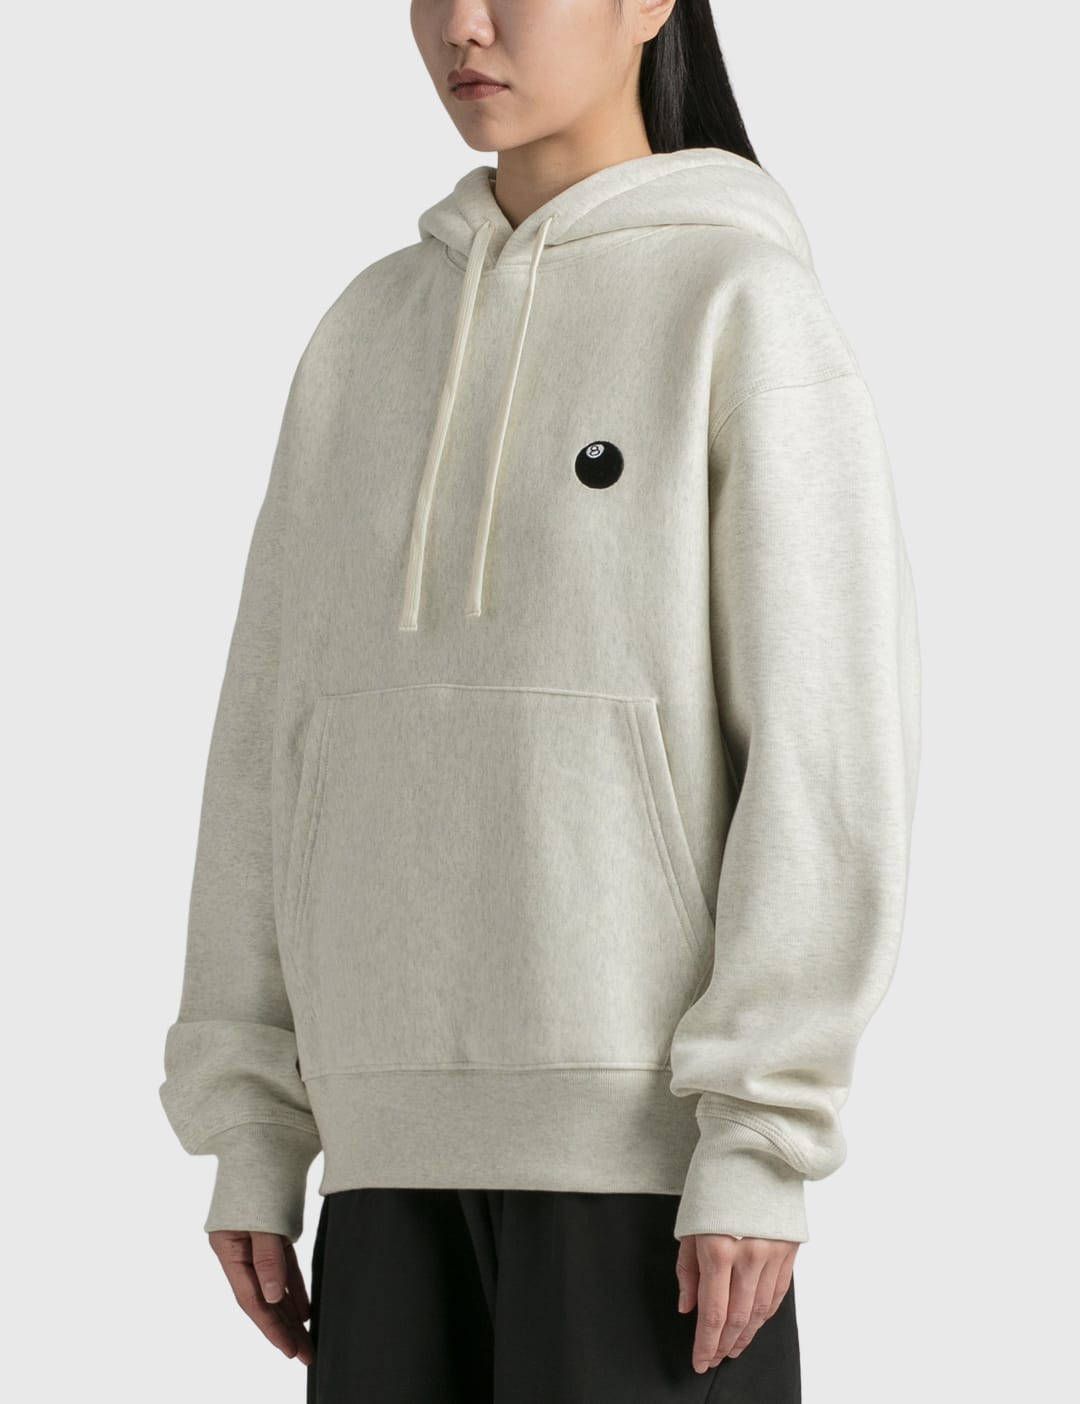 Stüssy - 8 Ball Embroidered Hoodie | HBX - Globally Curated 